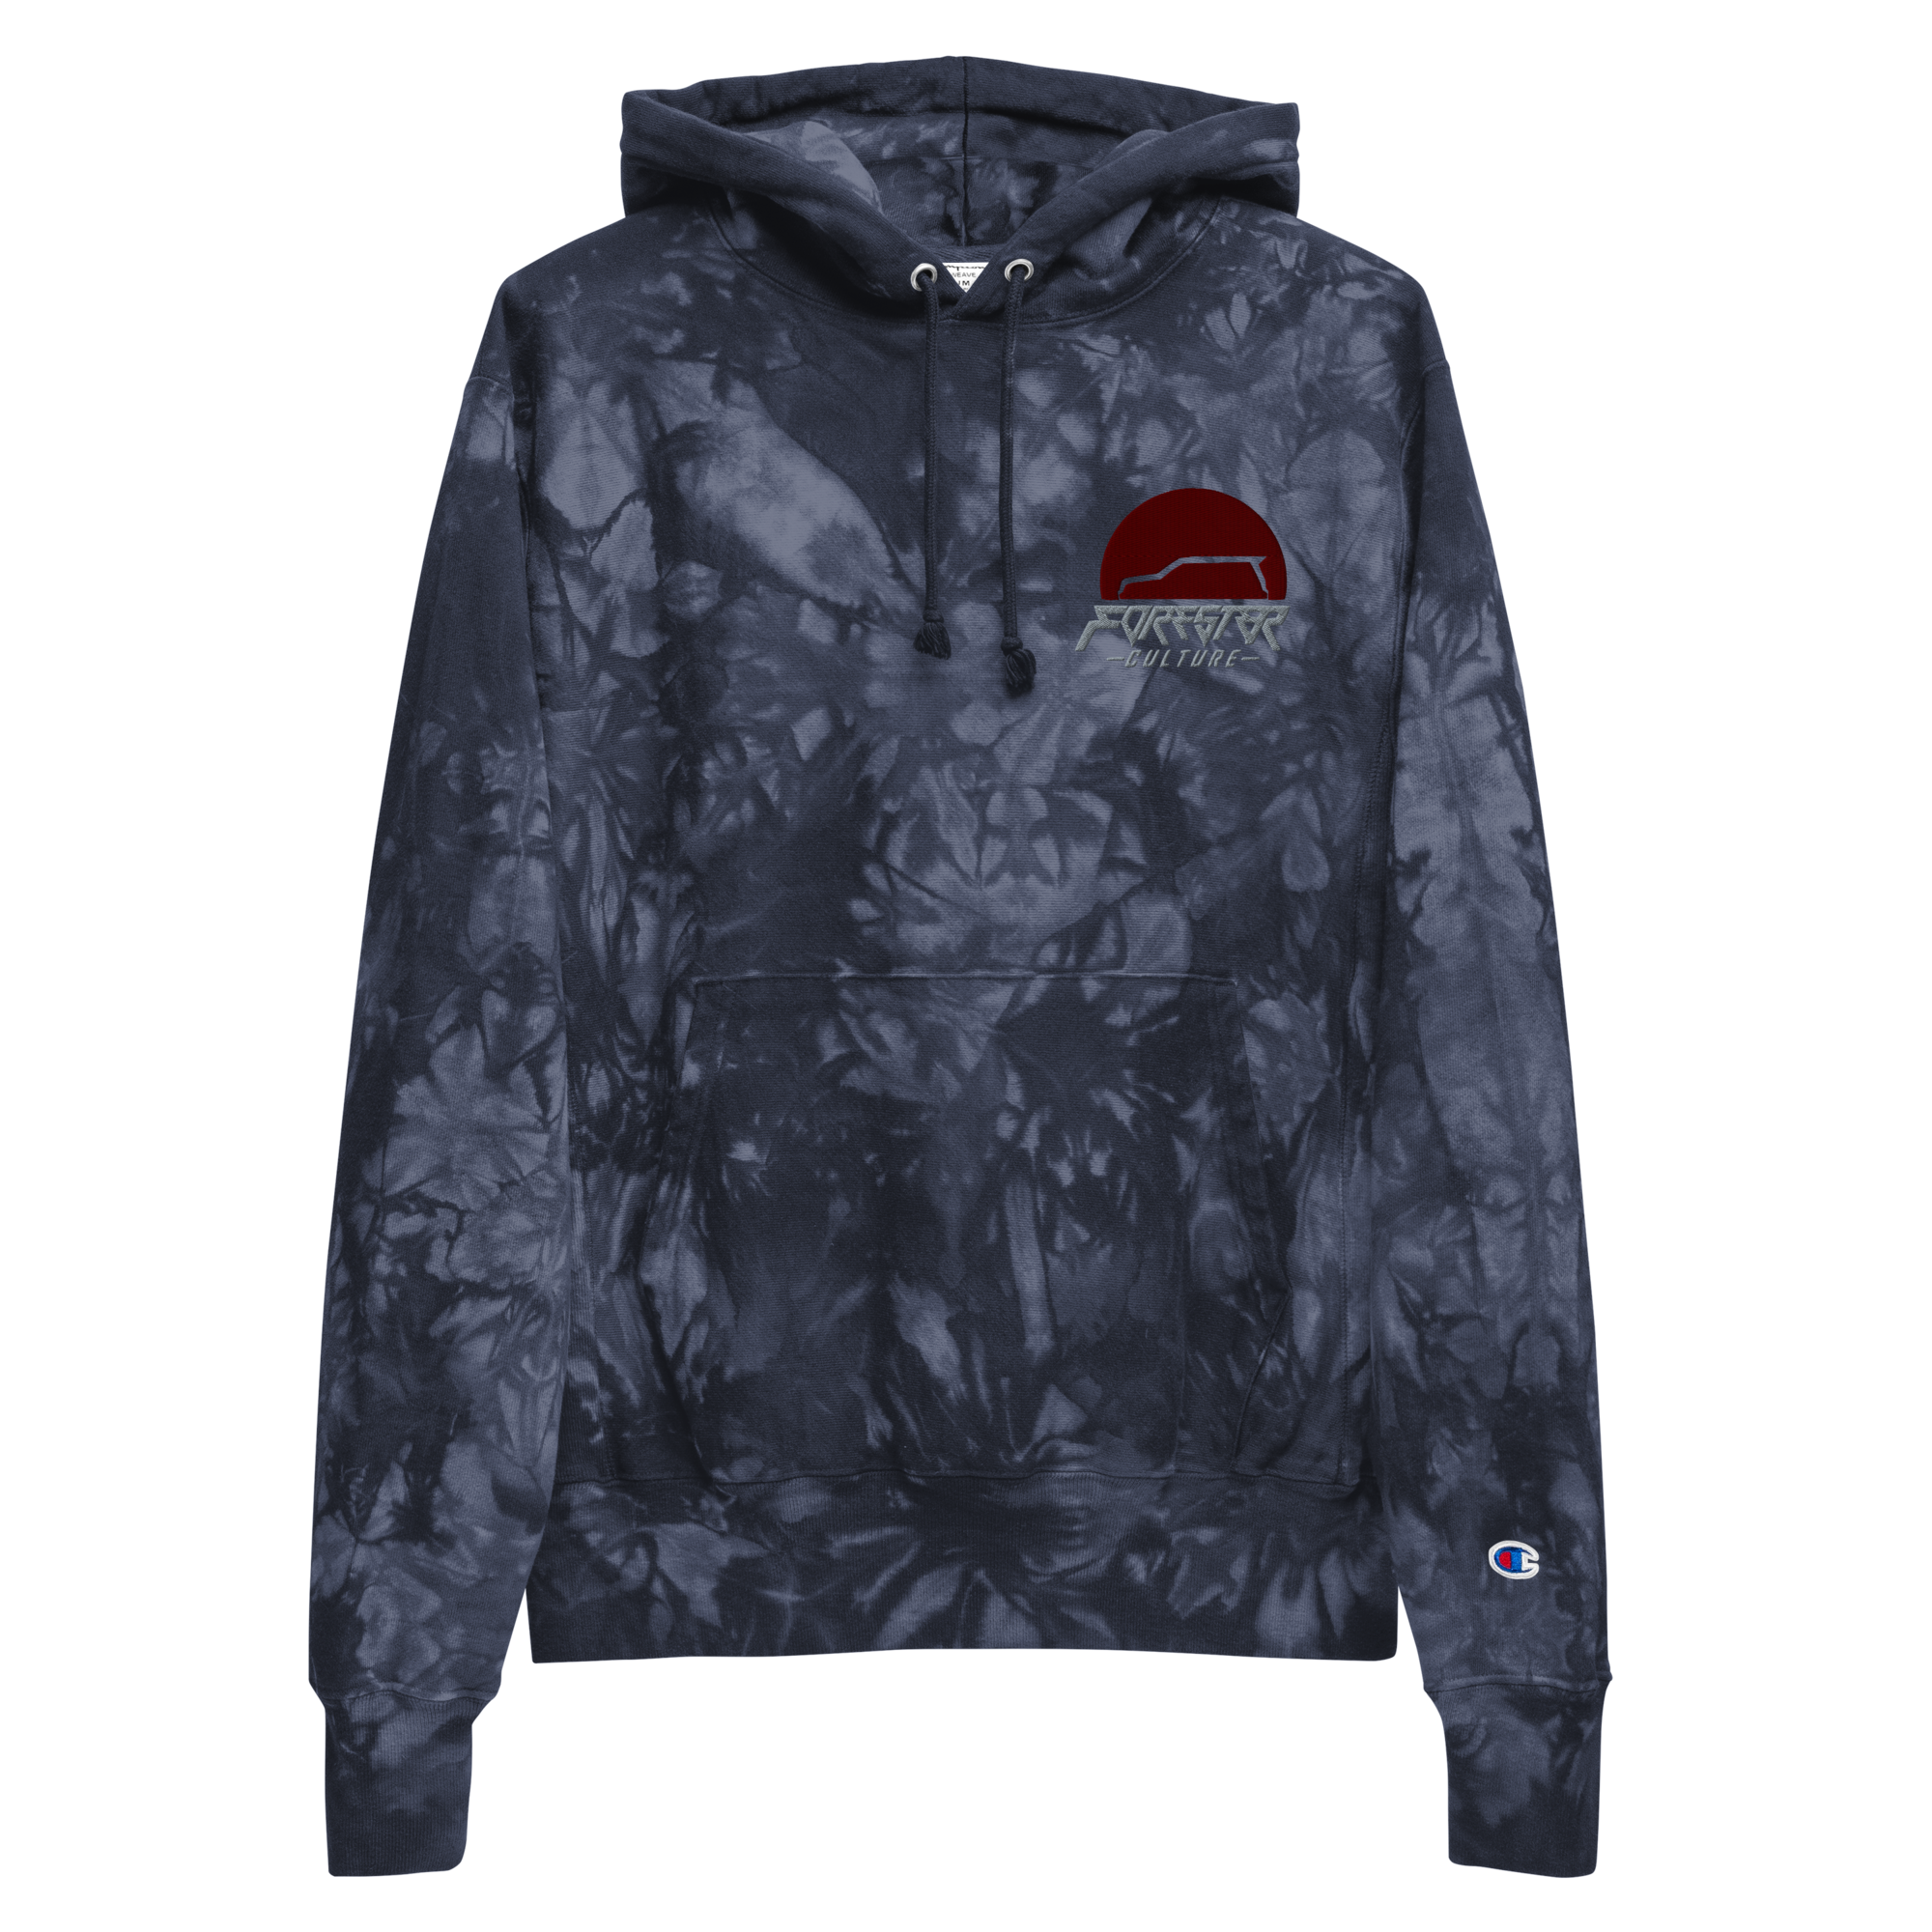 Champion tie-dye hoodie — Forester Culture